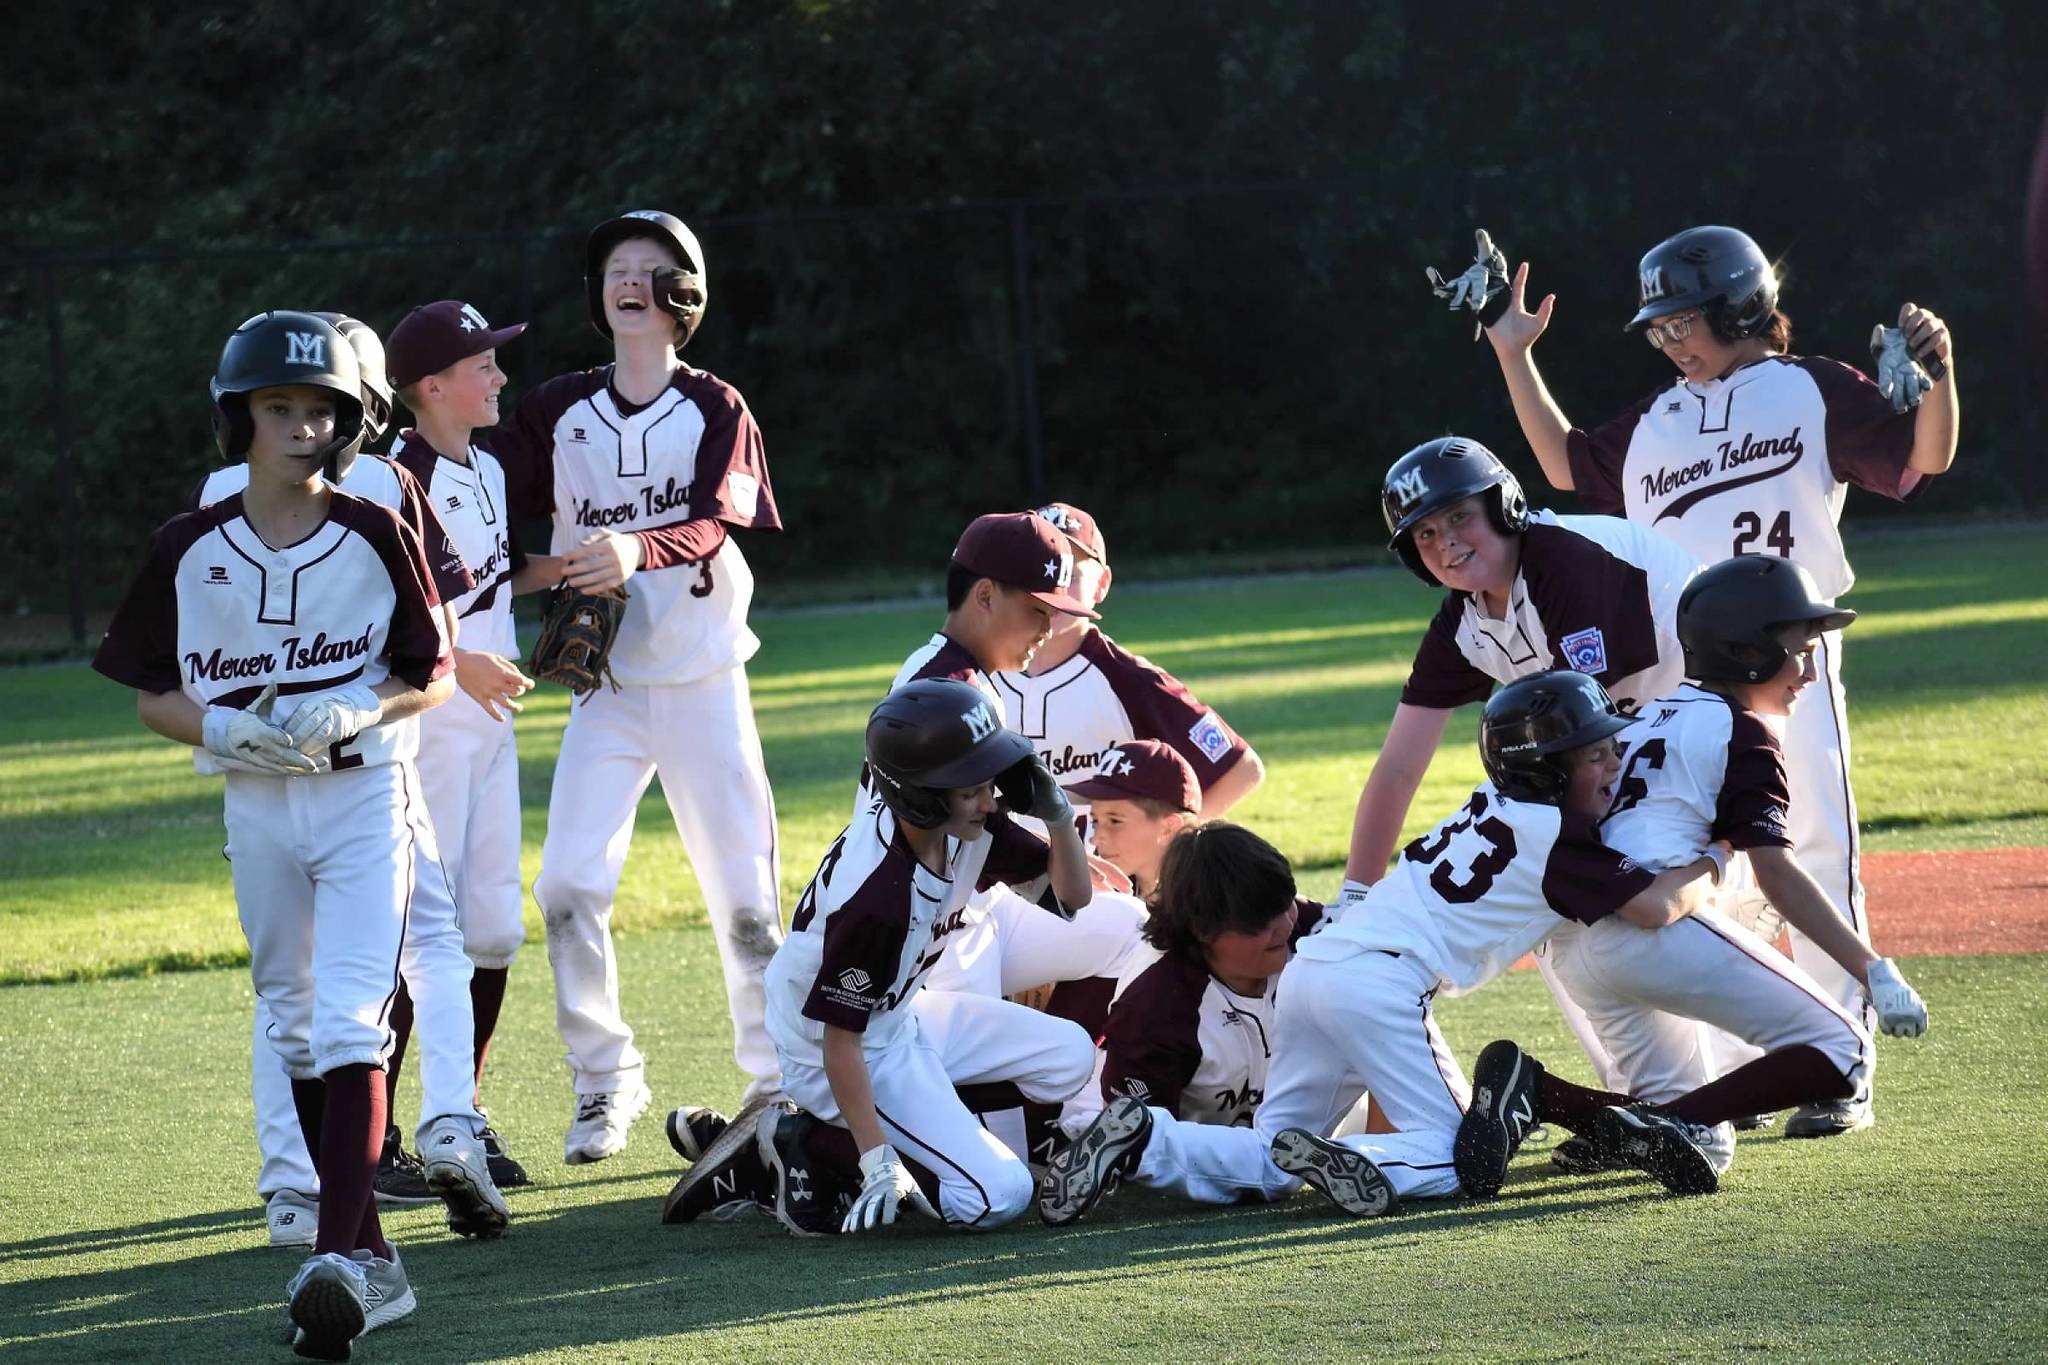 The Mercer Island Little League majors all-star team lost to Eastlake, 11-10, in game two of the District 9 final on July 12. The second-place local squad won its first three games of the double-elimination tournament over Bellevue Thunderbird (18-3), Sammamish (18-1) and Eastlake (4-3) at South Mercer Playfields. Mercer Island faced Eastlake twice more — after Eastlake advanced through the losers bracket — for the championship, with the locals losing both games. Eastlake won game one in extra innings, 8-6, to set up the final game. Pictured are Mercer Island players dog-piling to celebrate their victory over Eastlake on July 9. Eastlake won the state championship on July 26 over Lake Stevens, 6-0. The team is: Ben Shleifer, Brady Dolence, Brady Mock, Cash Little, Chase Kelly, Dash Dahlberg, Ethan Nguyen, Ewan Shea, Joey Weiss, Liam Sirianni, Lucas Kornylo, Mattias Hofstetter, Theo Roodman and coaches Eric Dahlberg, Jay Shleifer and Casey Little. Photo courtesy of Kym Otte